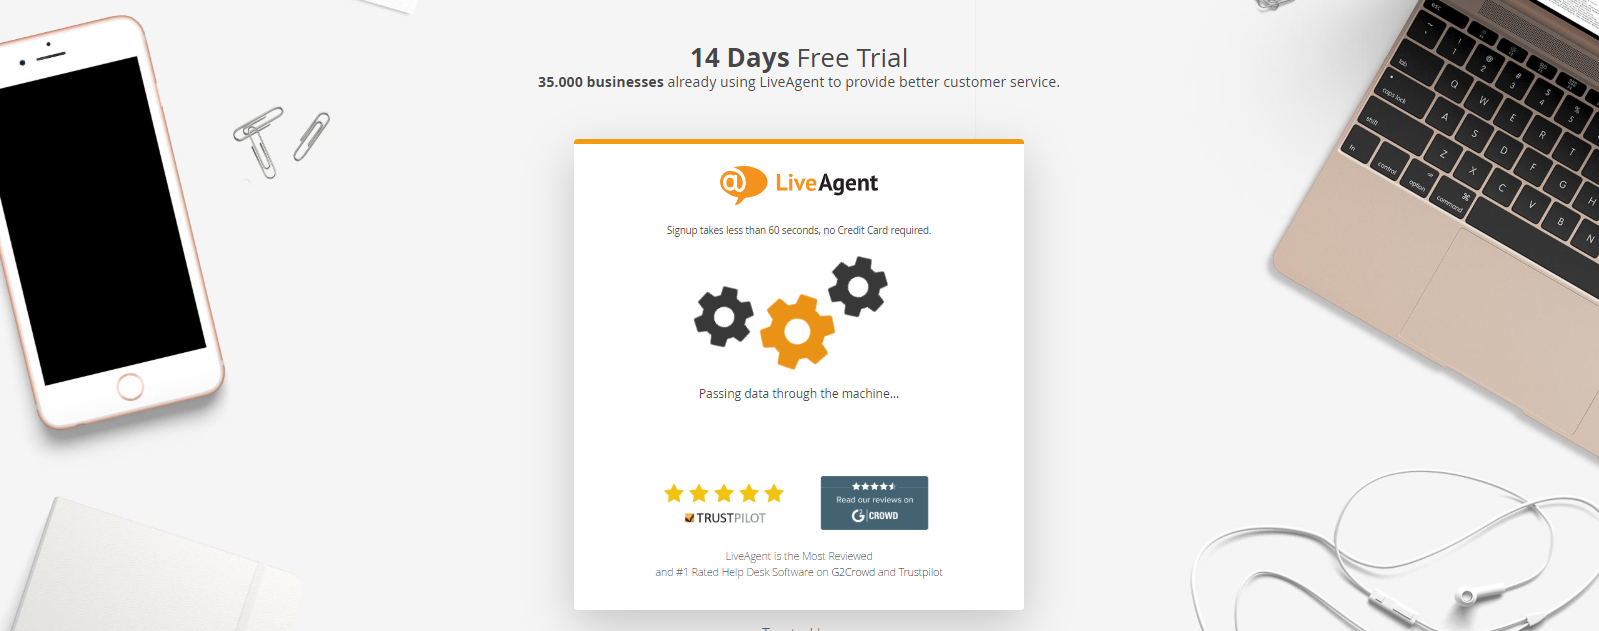 What Are The Features of LiveAgent?